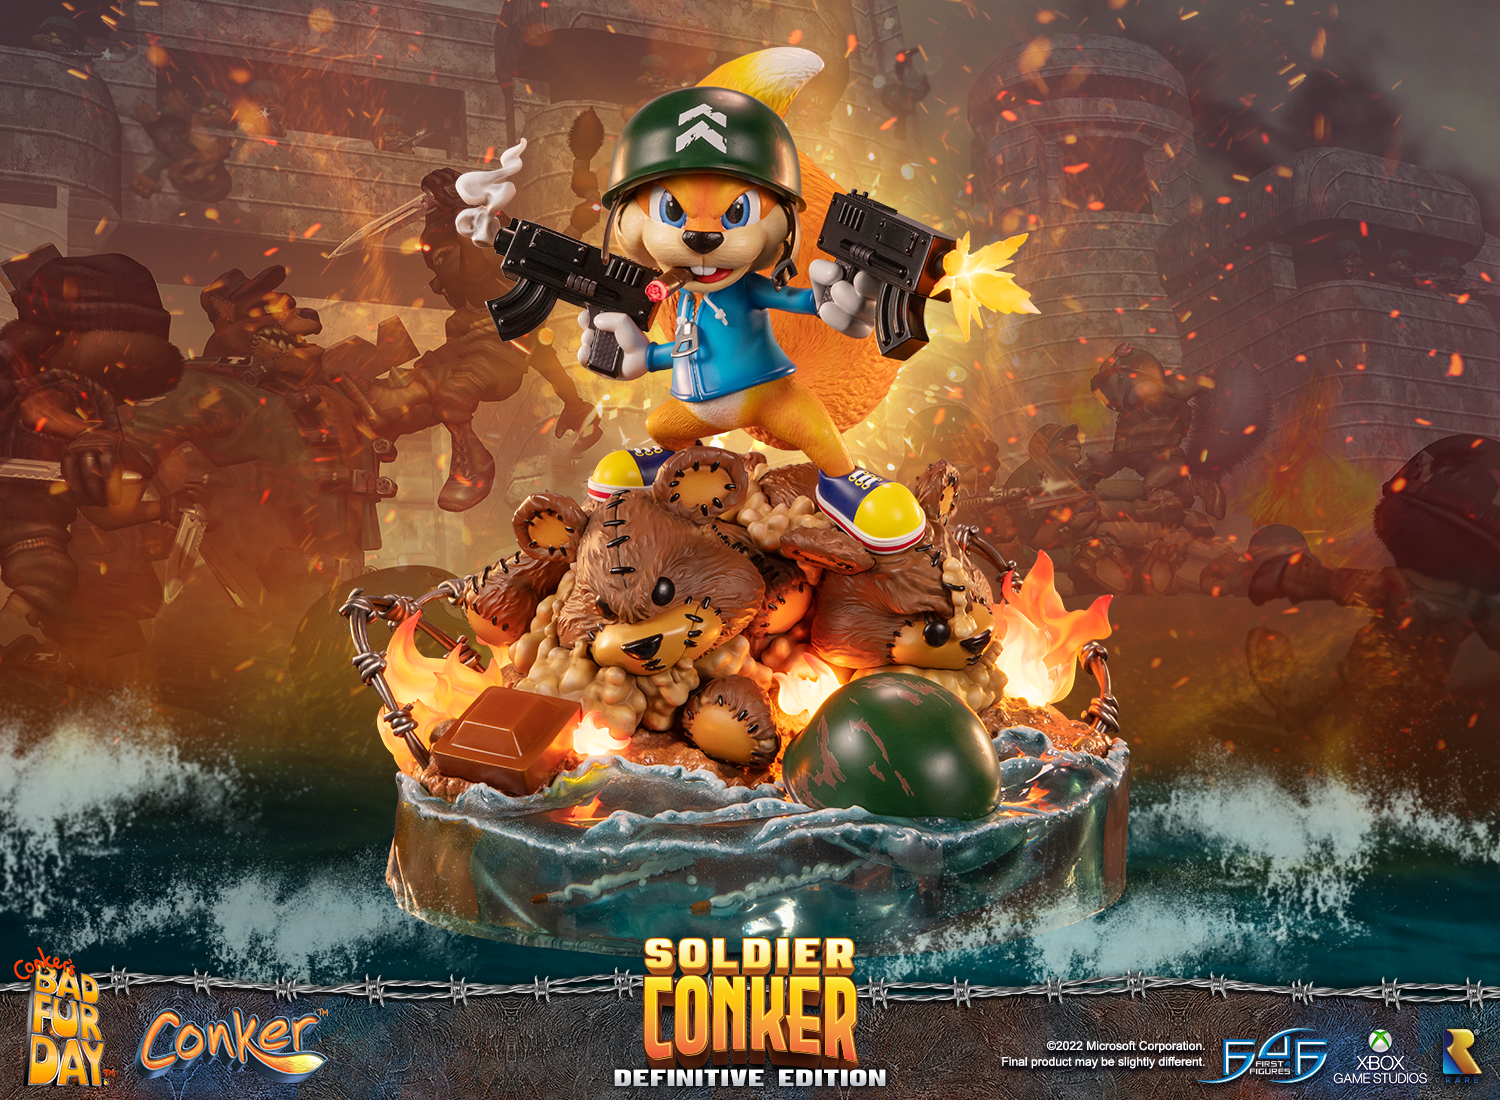 Soldier Conker (Definitive Edition)